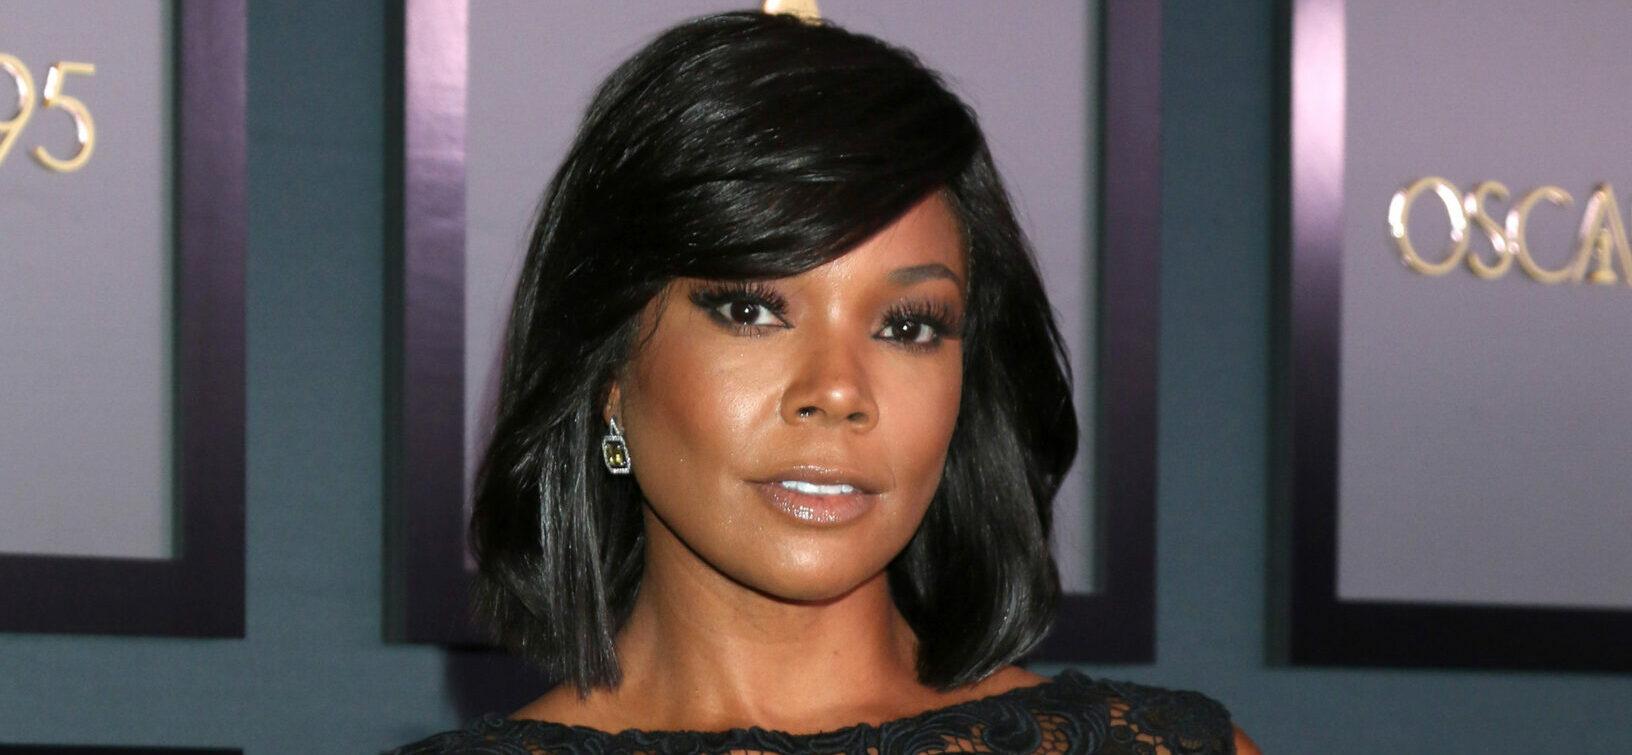 Gabrielle Union Redefines Excellence To ‘Black On Black’ As She Struts In Sparkling Dress